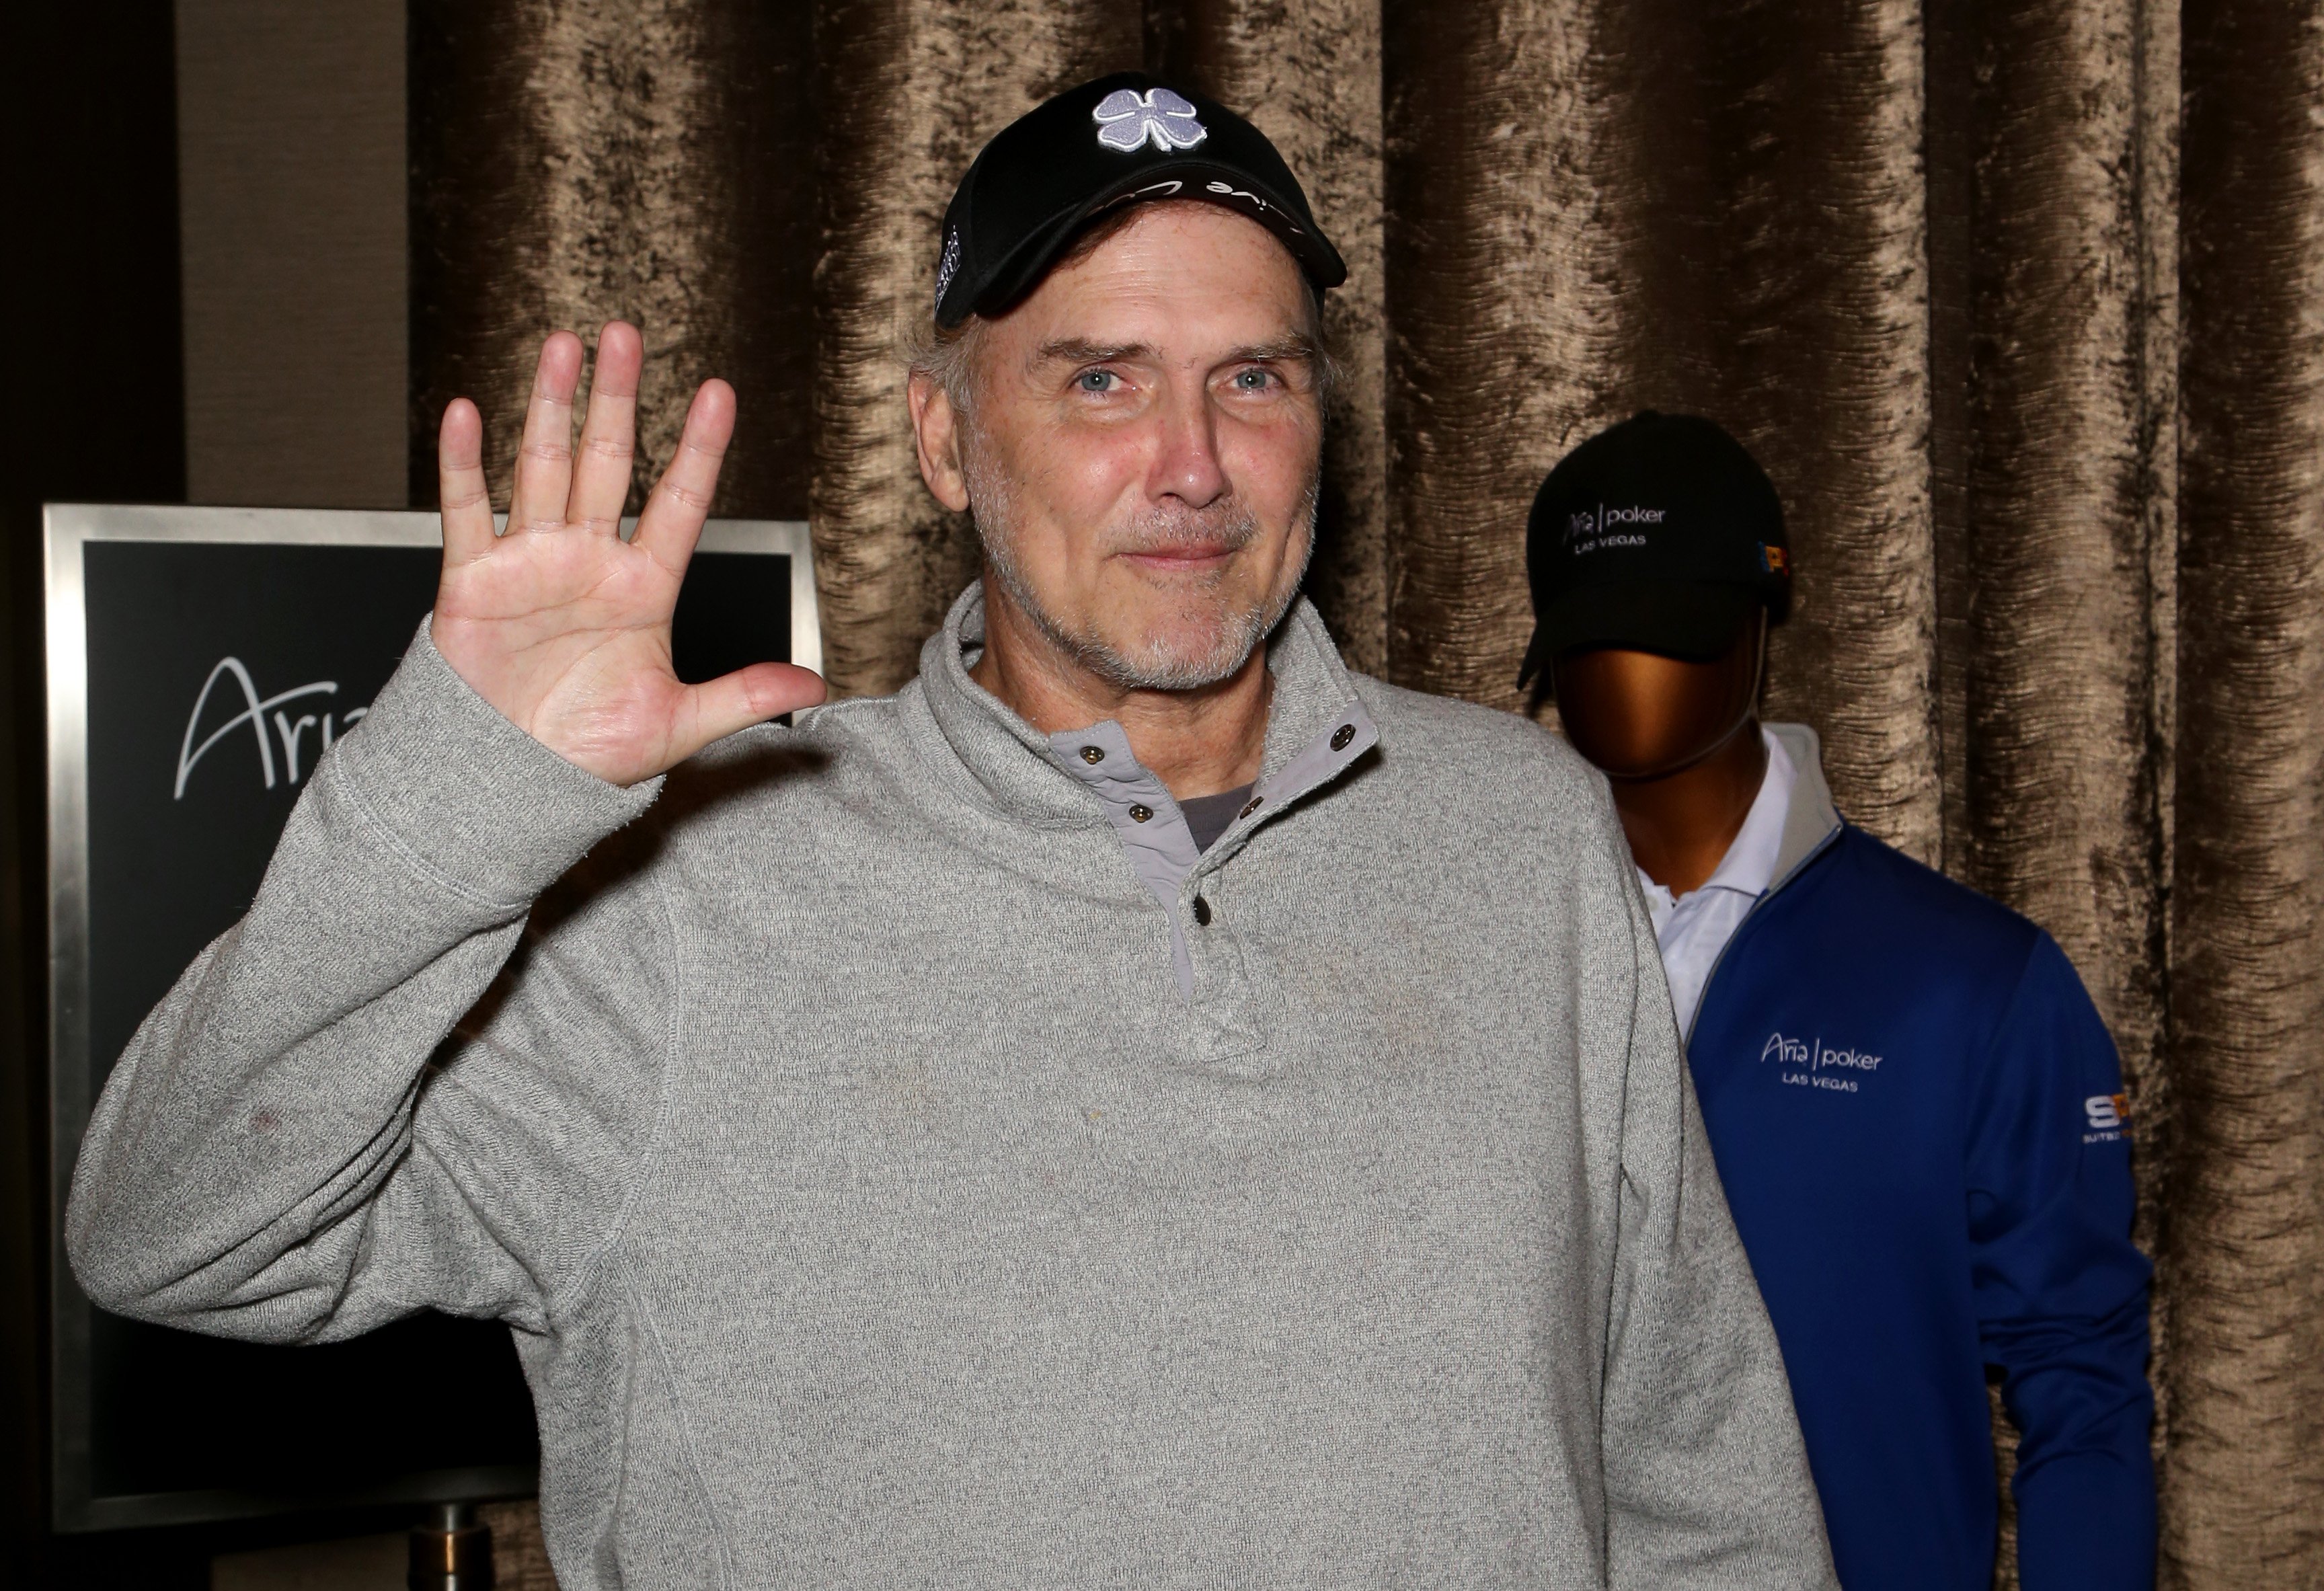 Norm Macdonald in a gray sweater and black baseball hat.